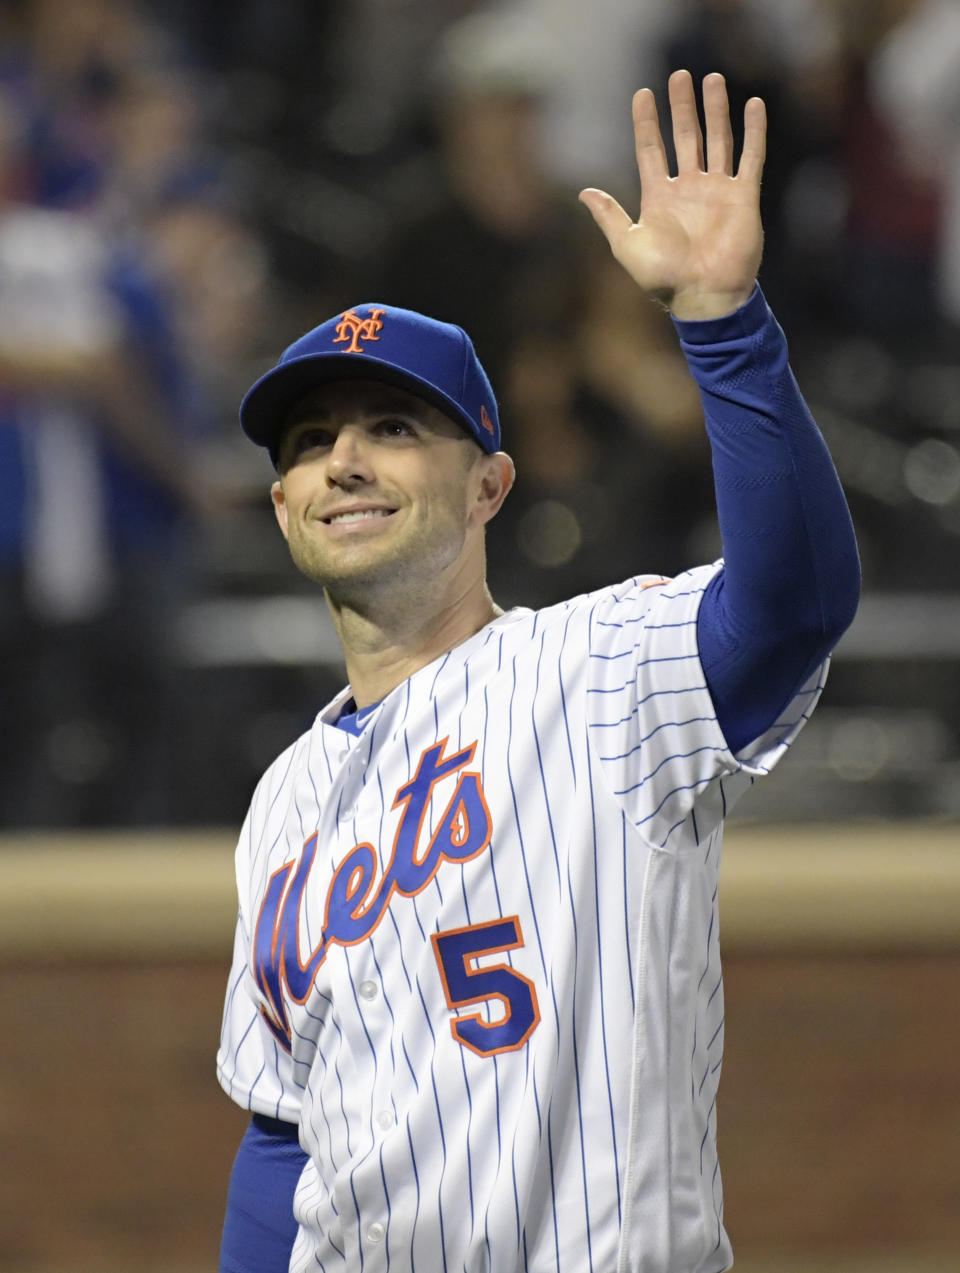 New York Mets third baseman David Wright thanks the fans after the Mets' baseball game against the Miami Marlins on Saturday, Sept. 29, 2018, in New York. (AP Photo/Bill Kostroun)